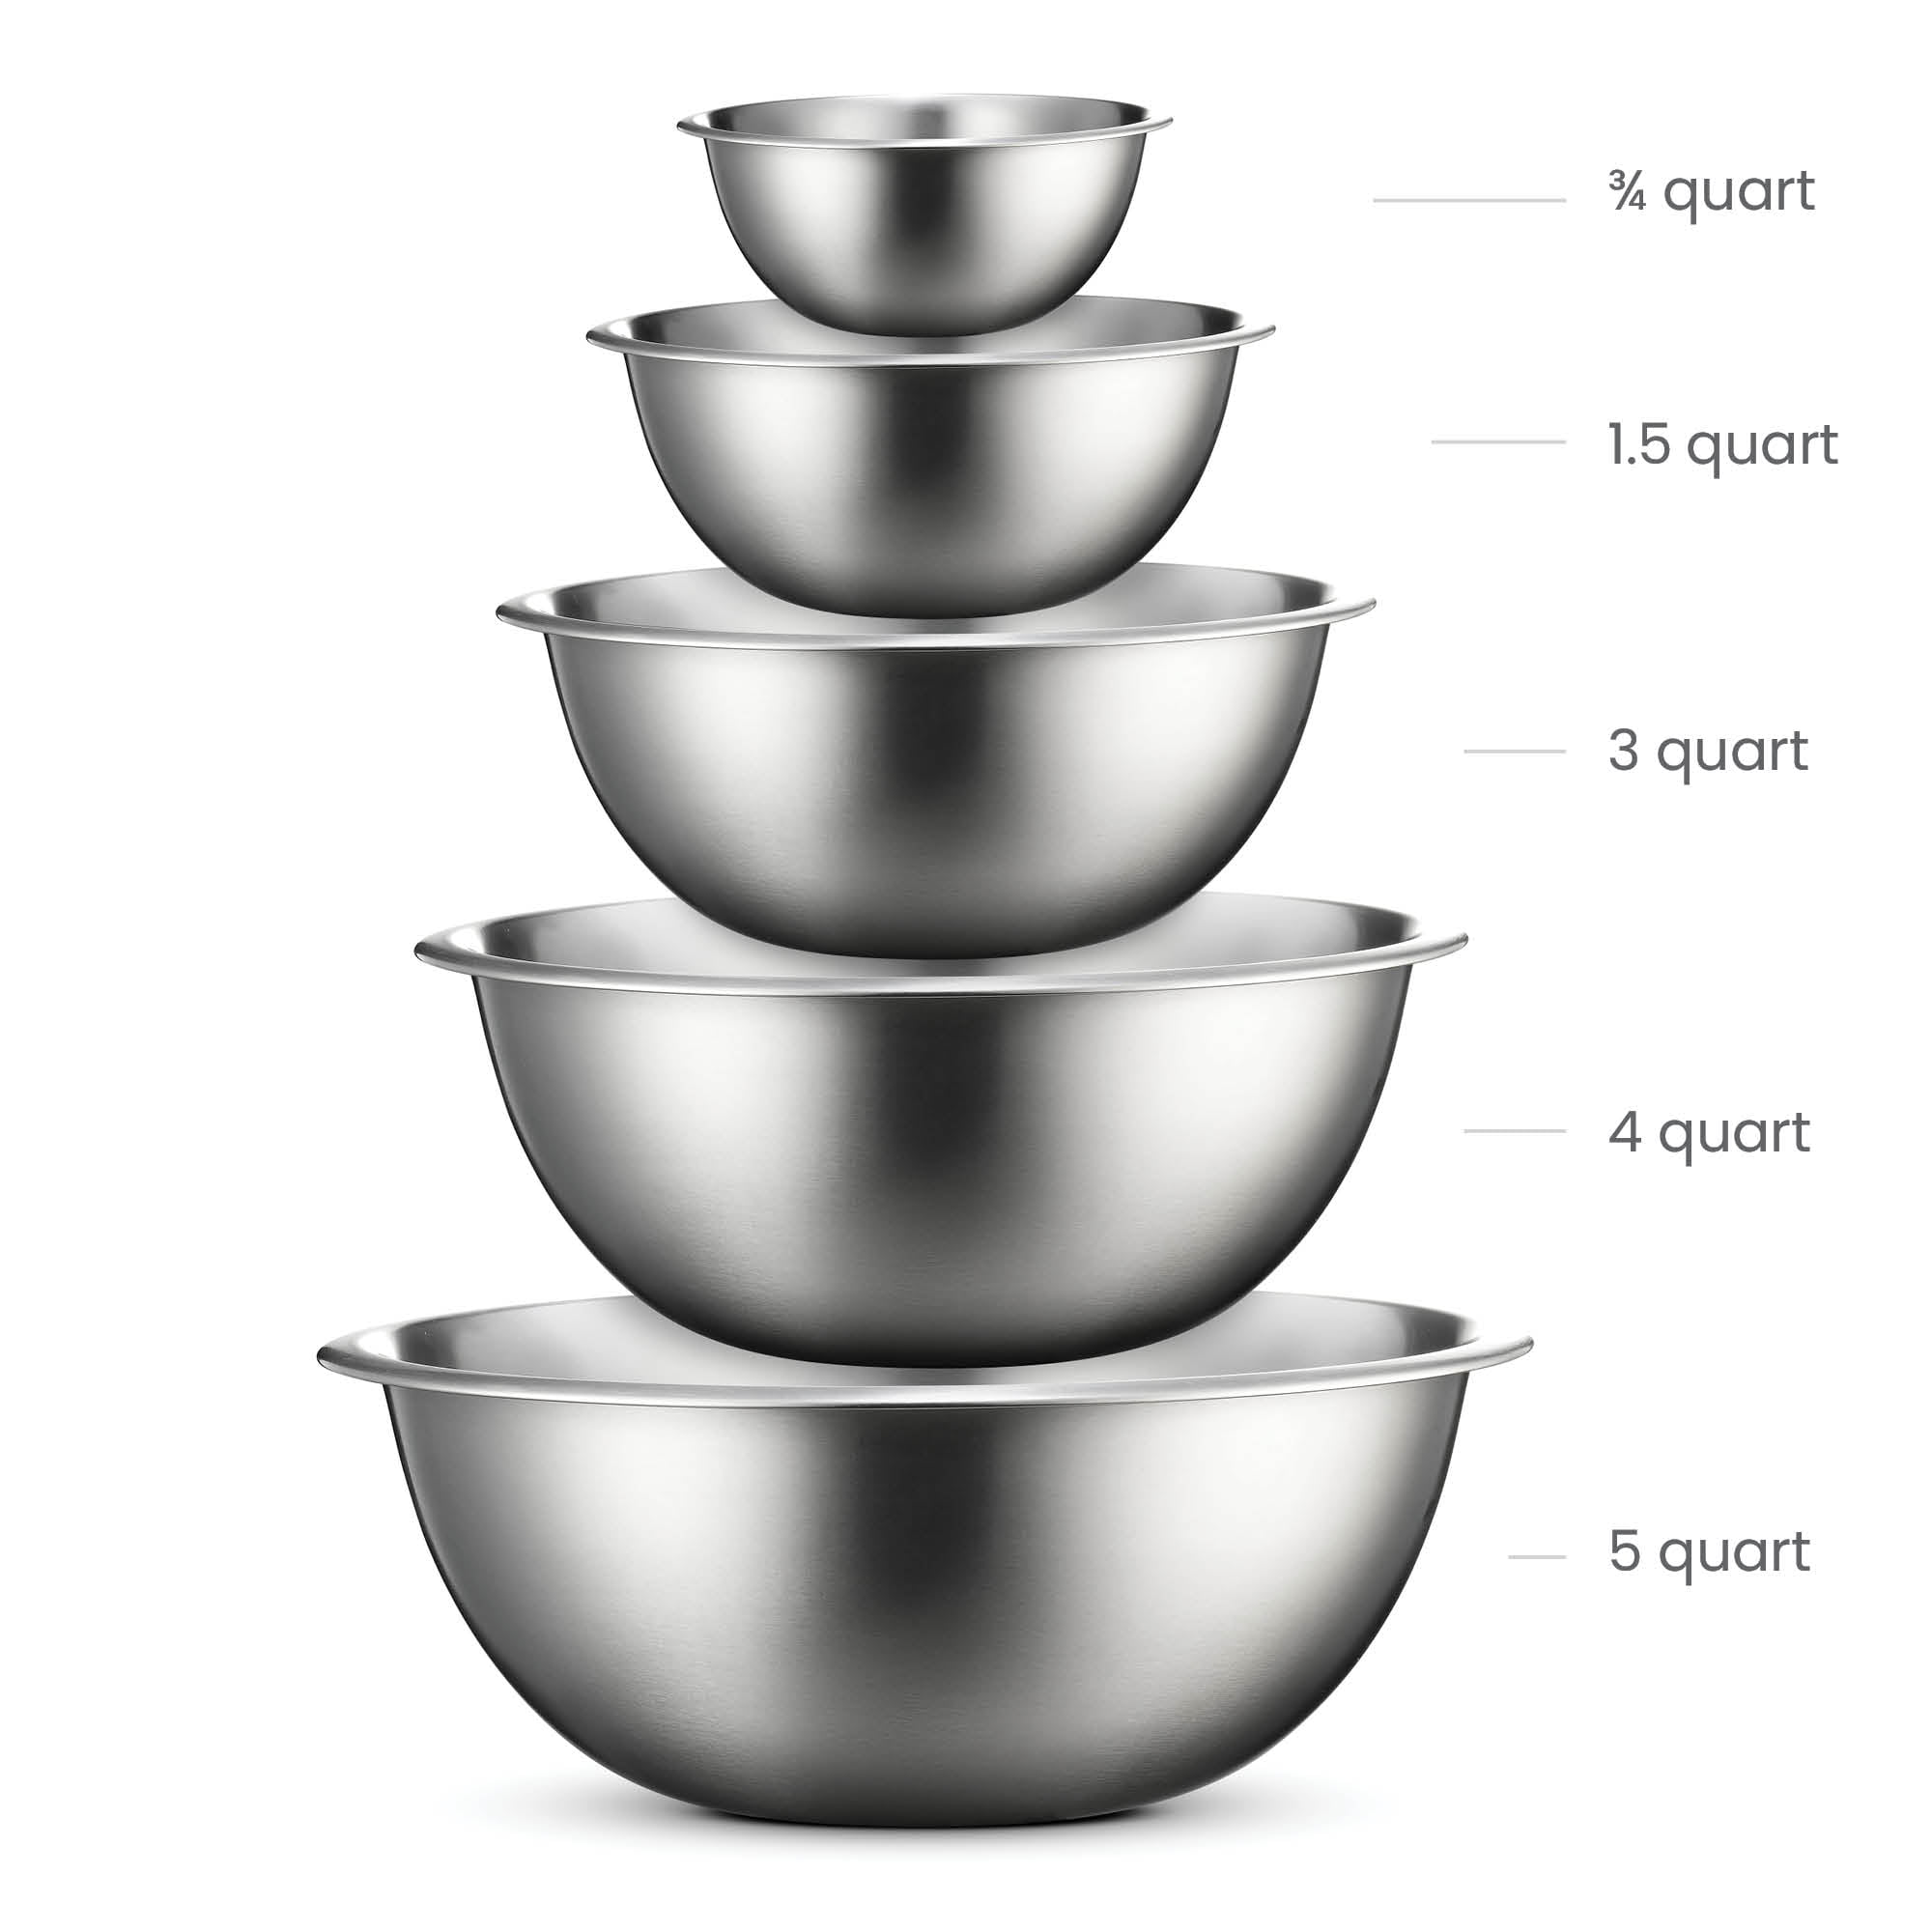 FineDine Stainless Steel Mixing Bowls (Set of 6) - Easy to Clean, Nesting Bowls for Space Saving Storage, Great for Cooking, Baking, Prepping